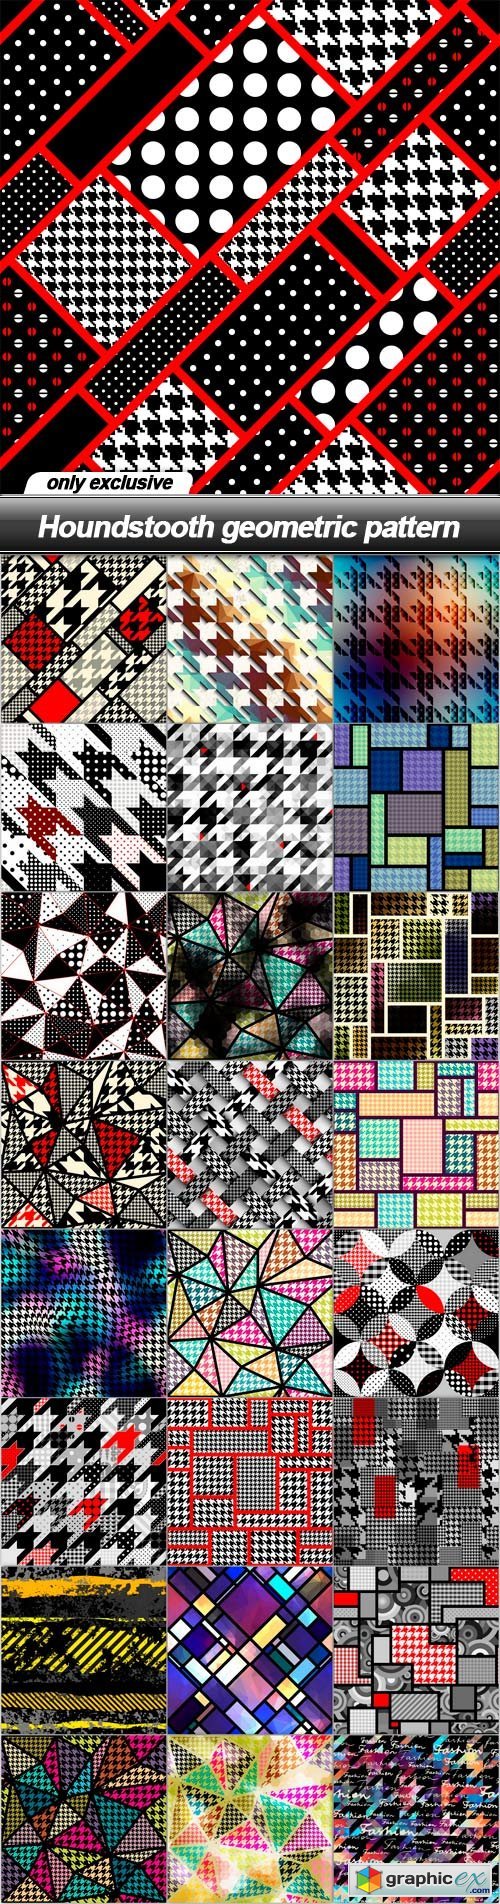 Houndstooth geometric pattern - 25 EPS